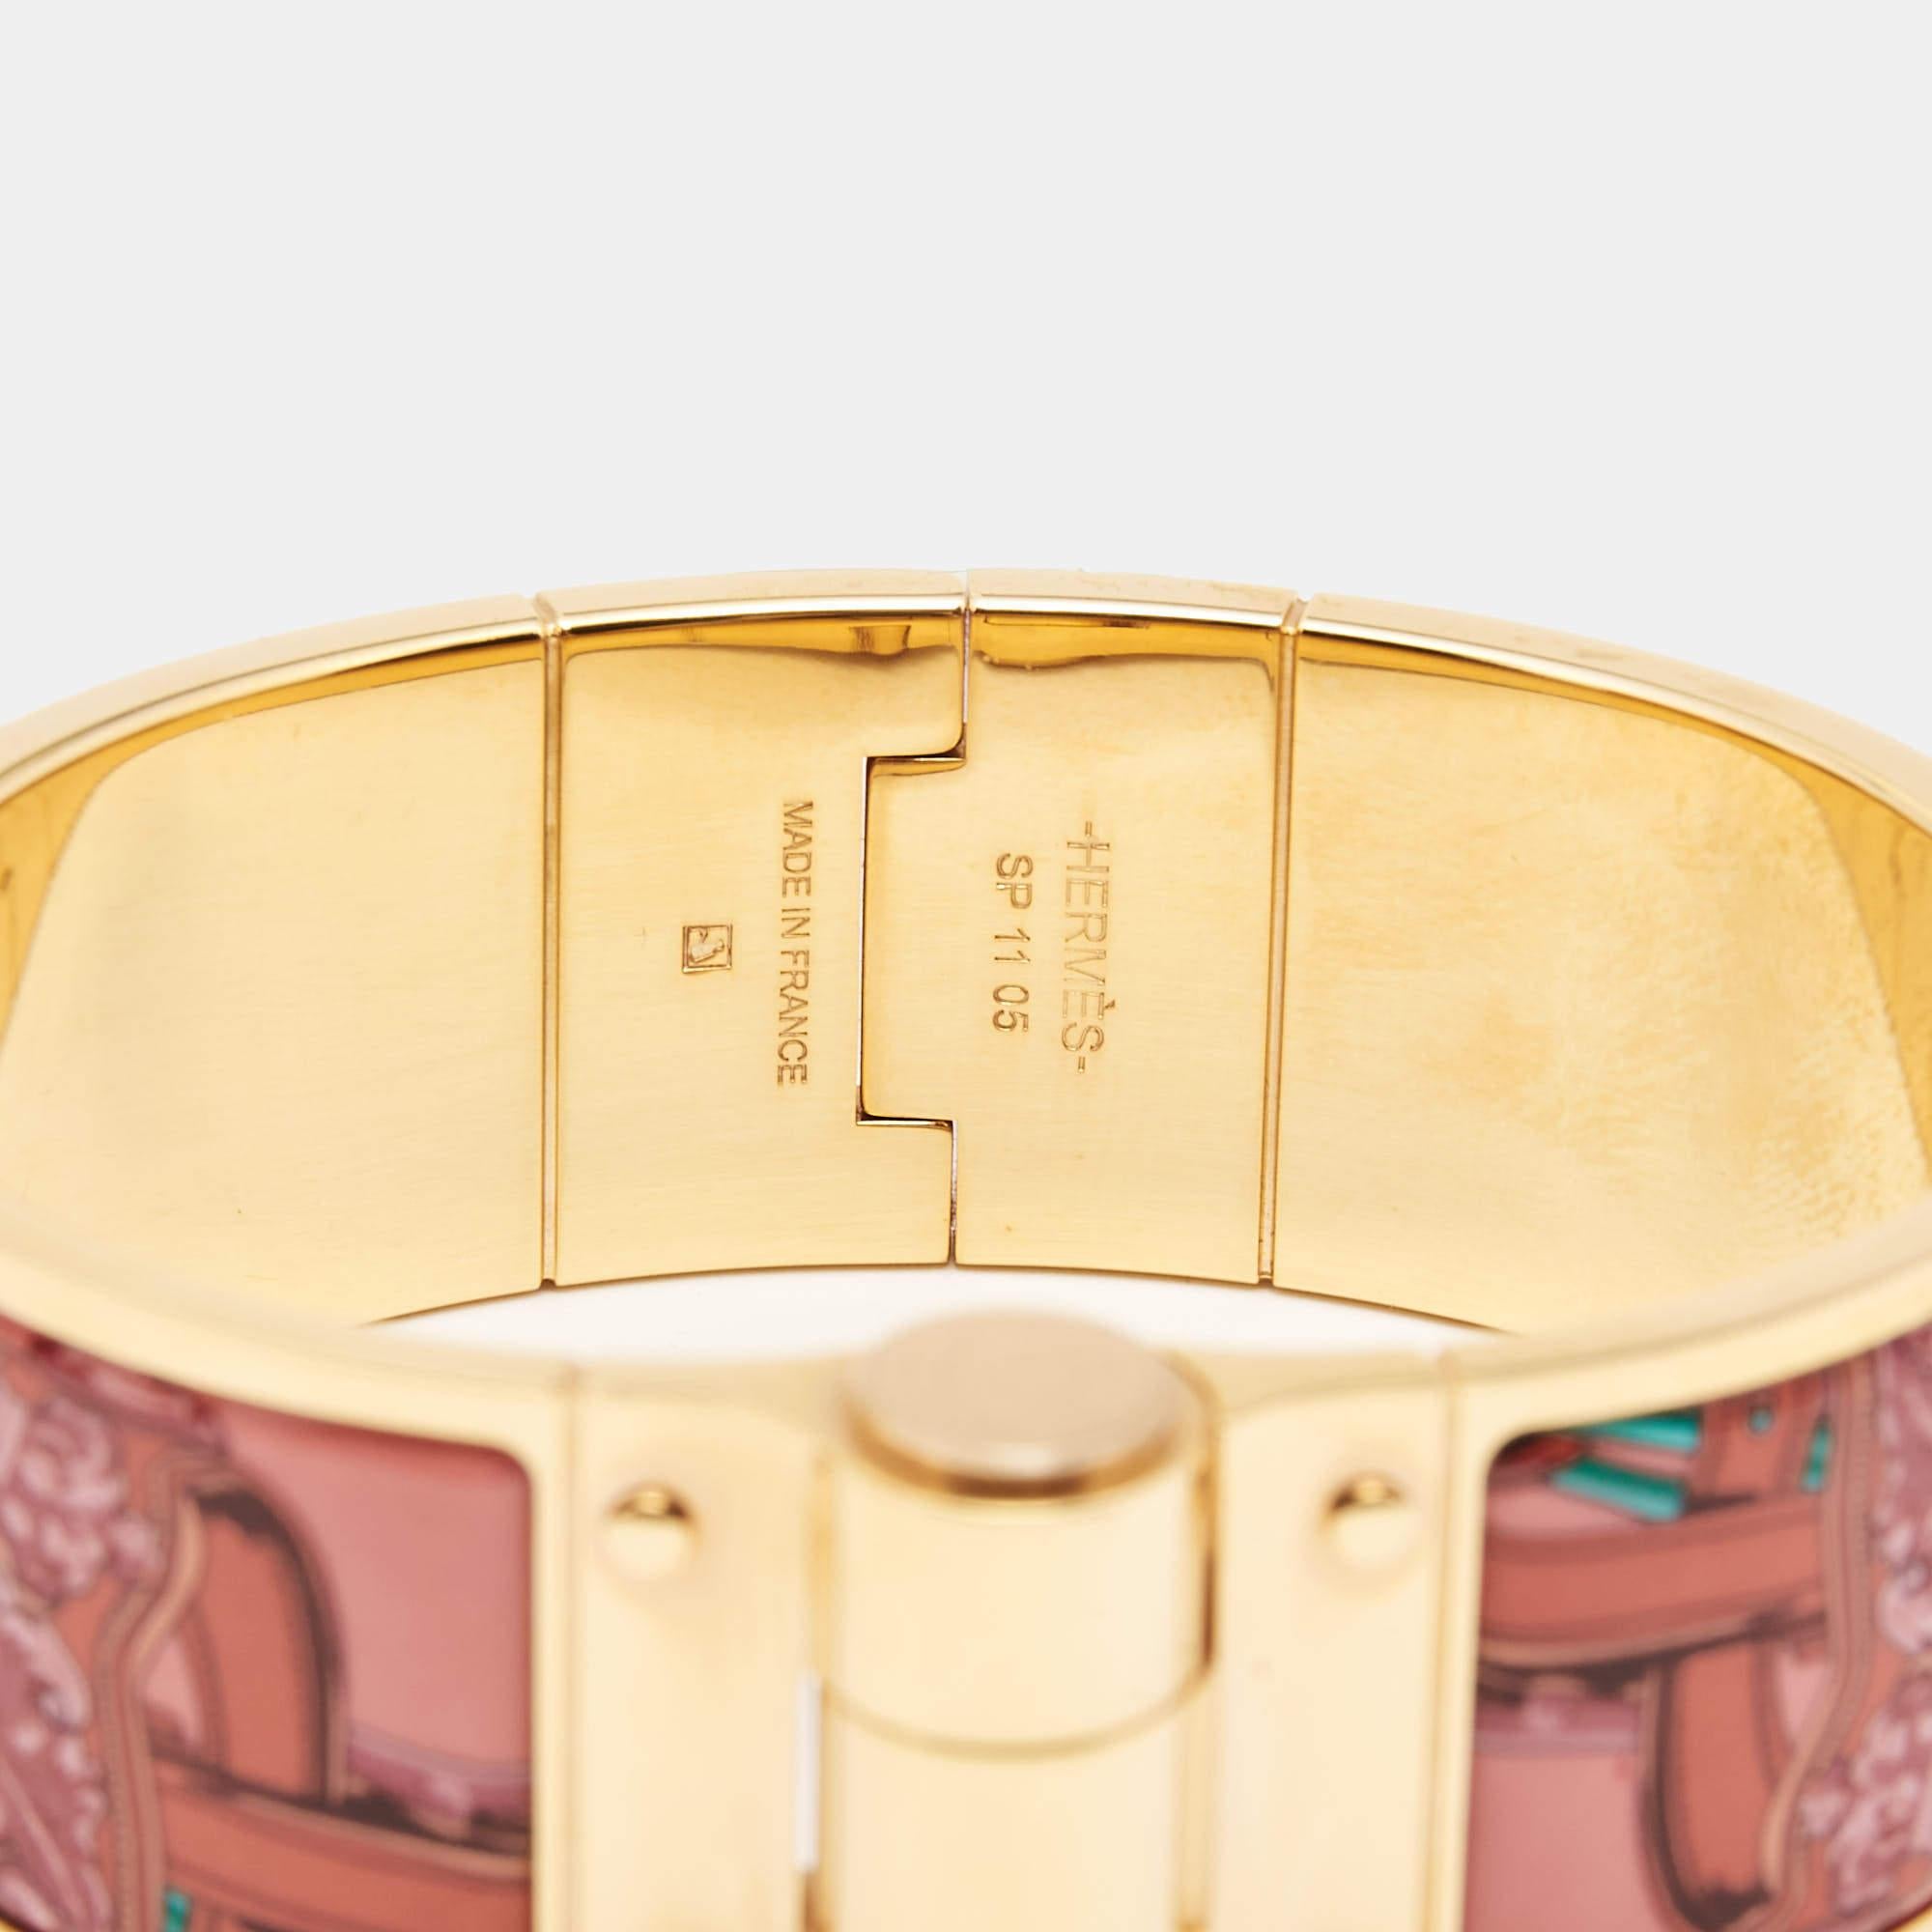 This elegant Brides de Gala bracelet from the house of Hermès is designed in a wide silhouette. It features a gold-plated body with appealing designs on it. Wear it with your favorite watch or as a solo piece.

Includes: Original Box, Original